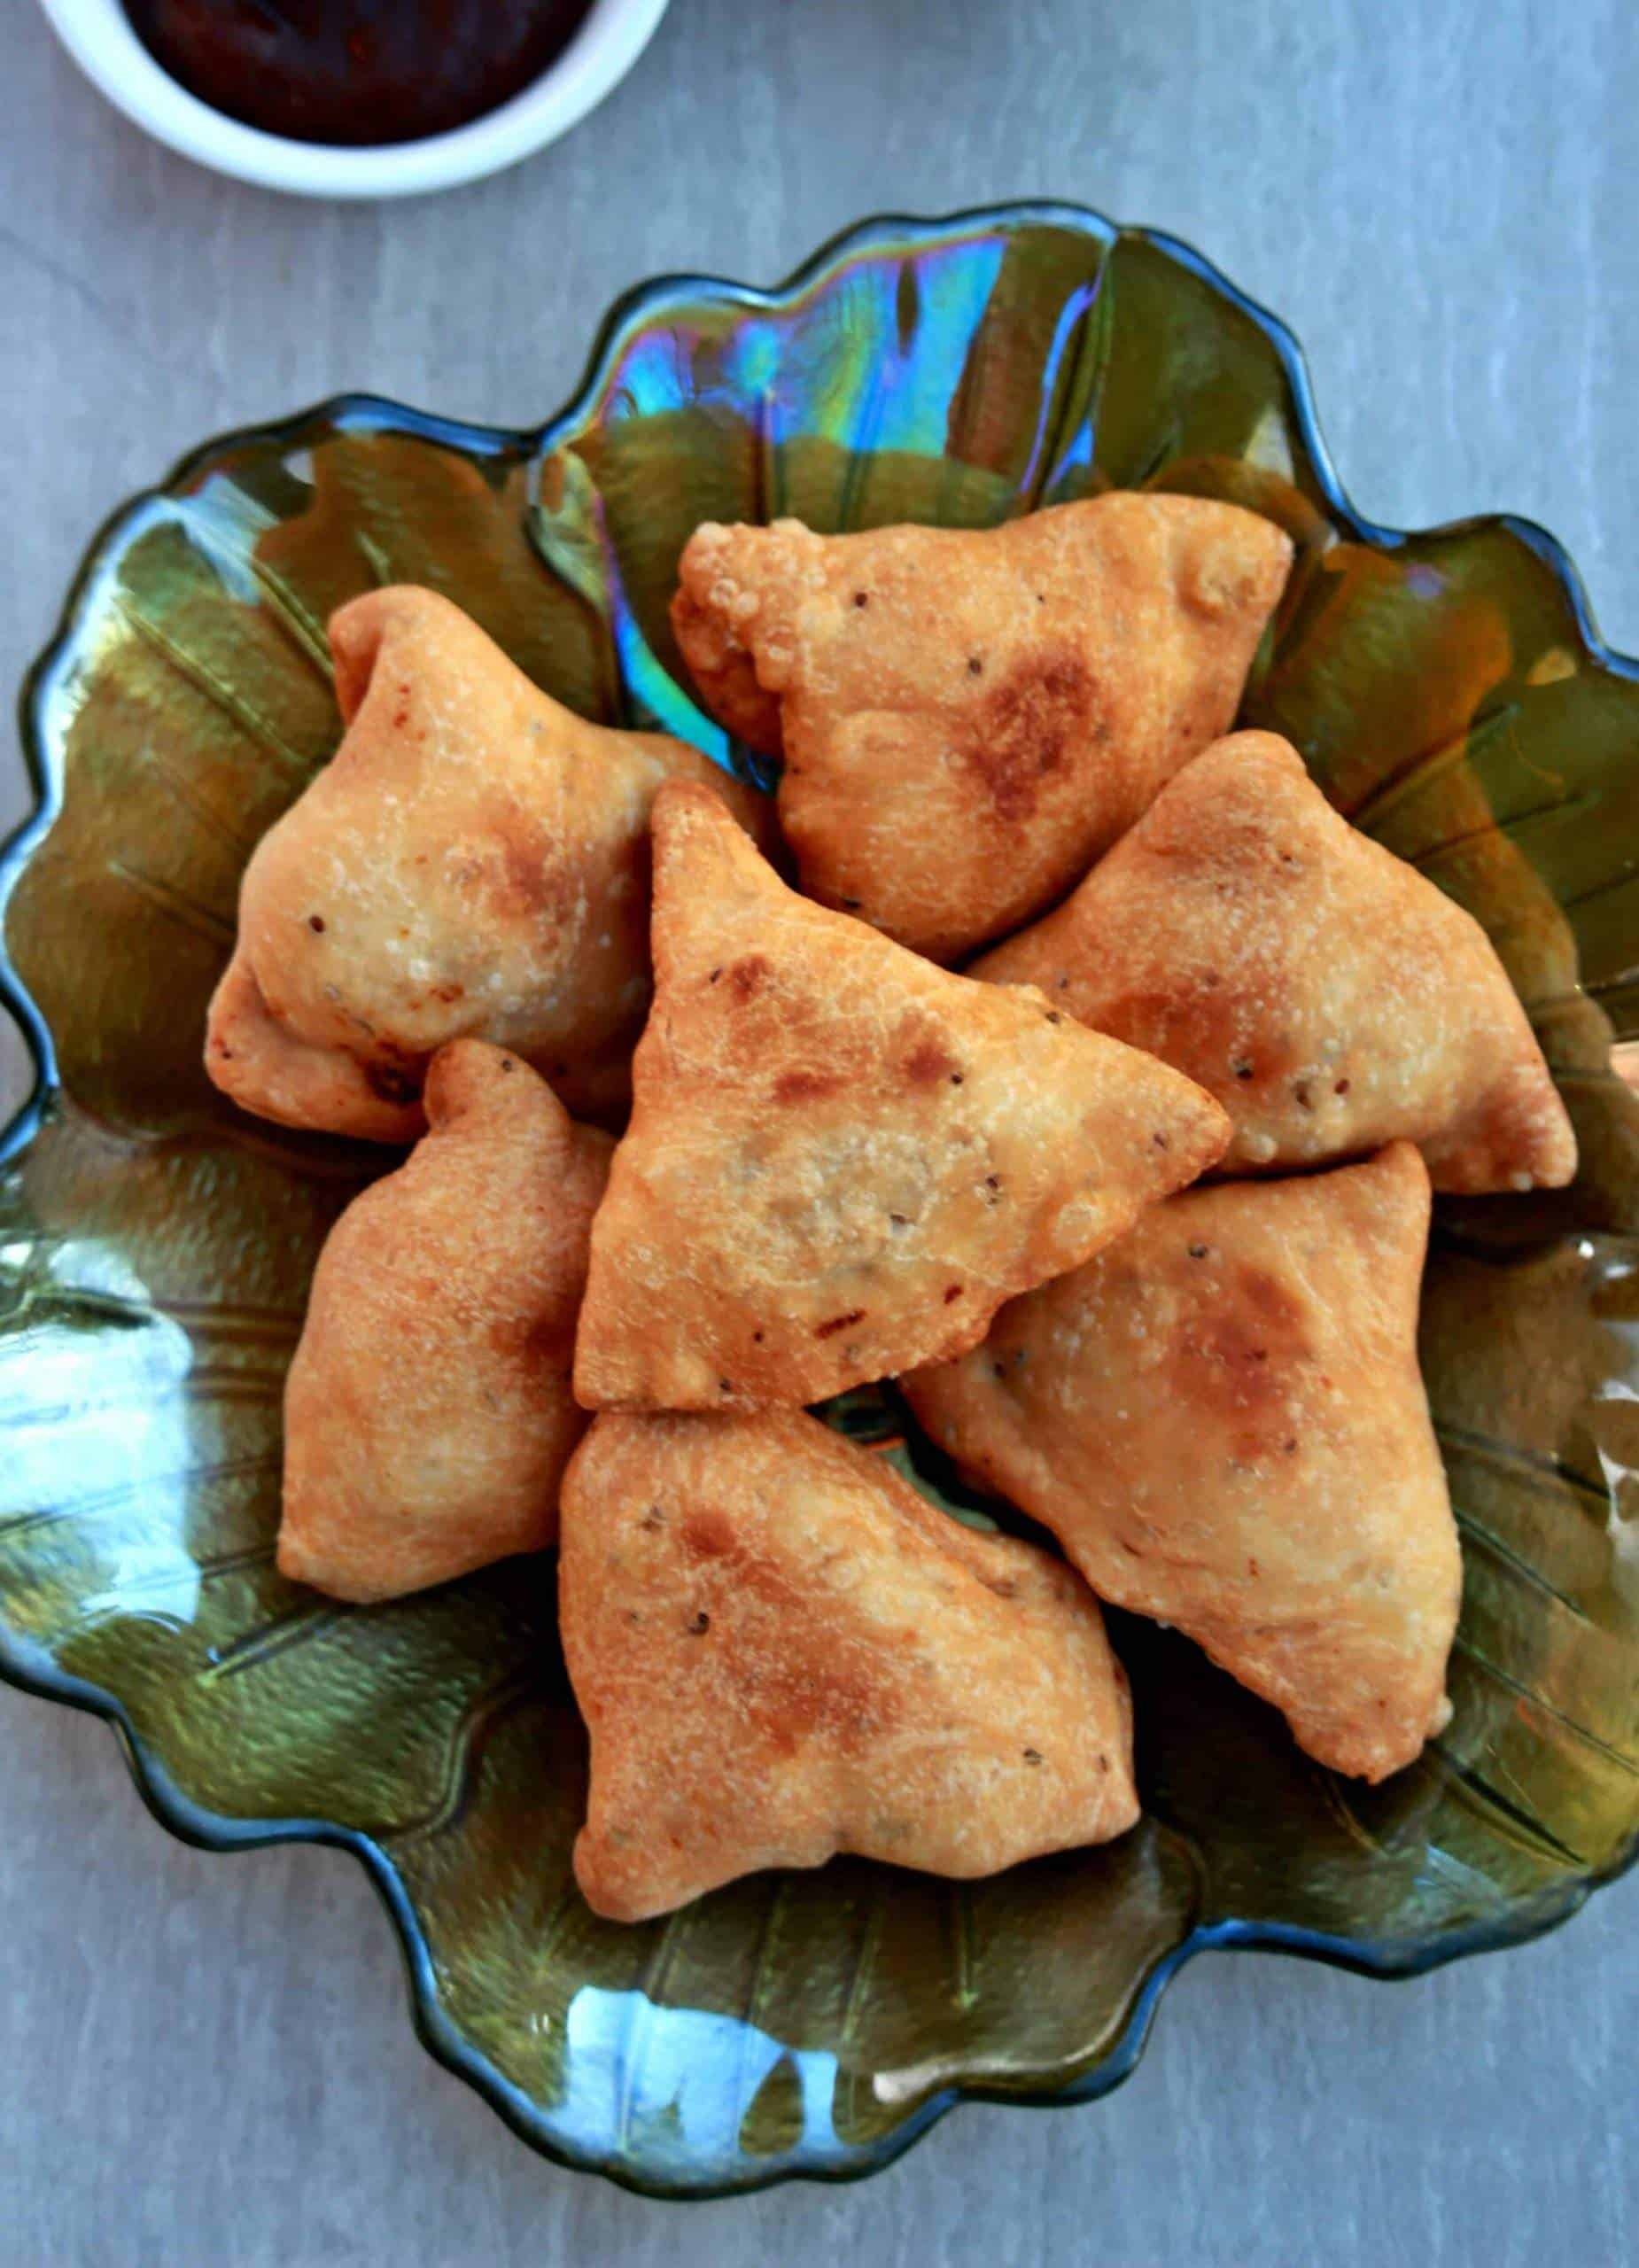 Samosa in a bowl